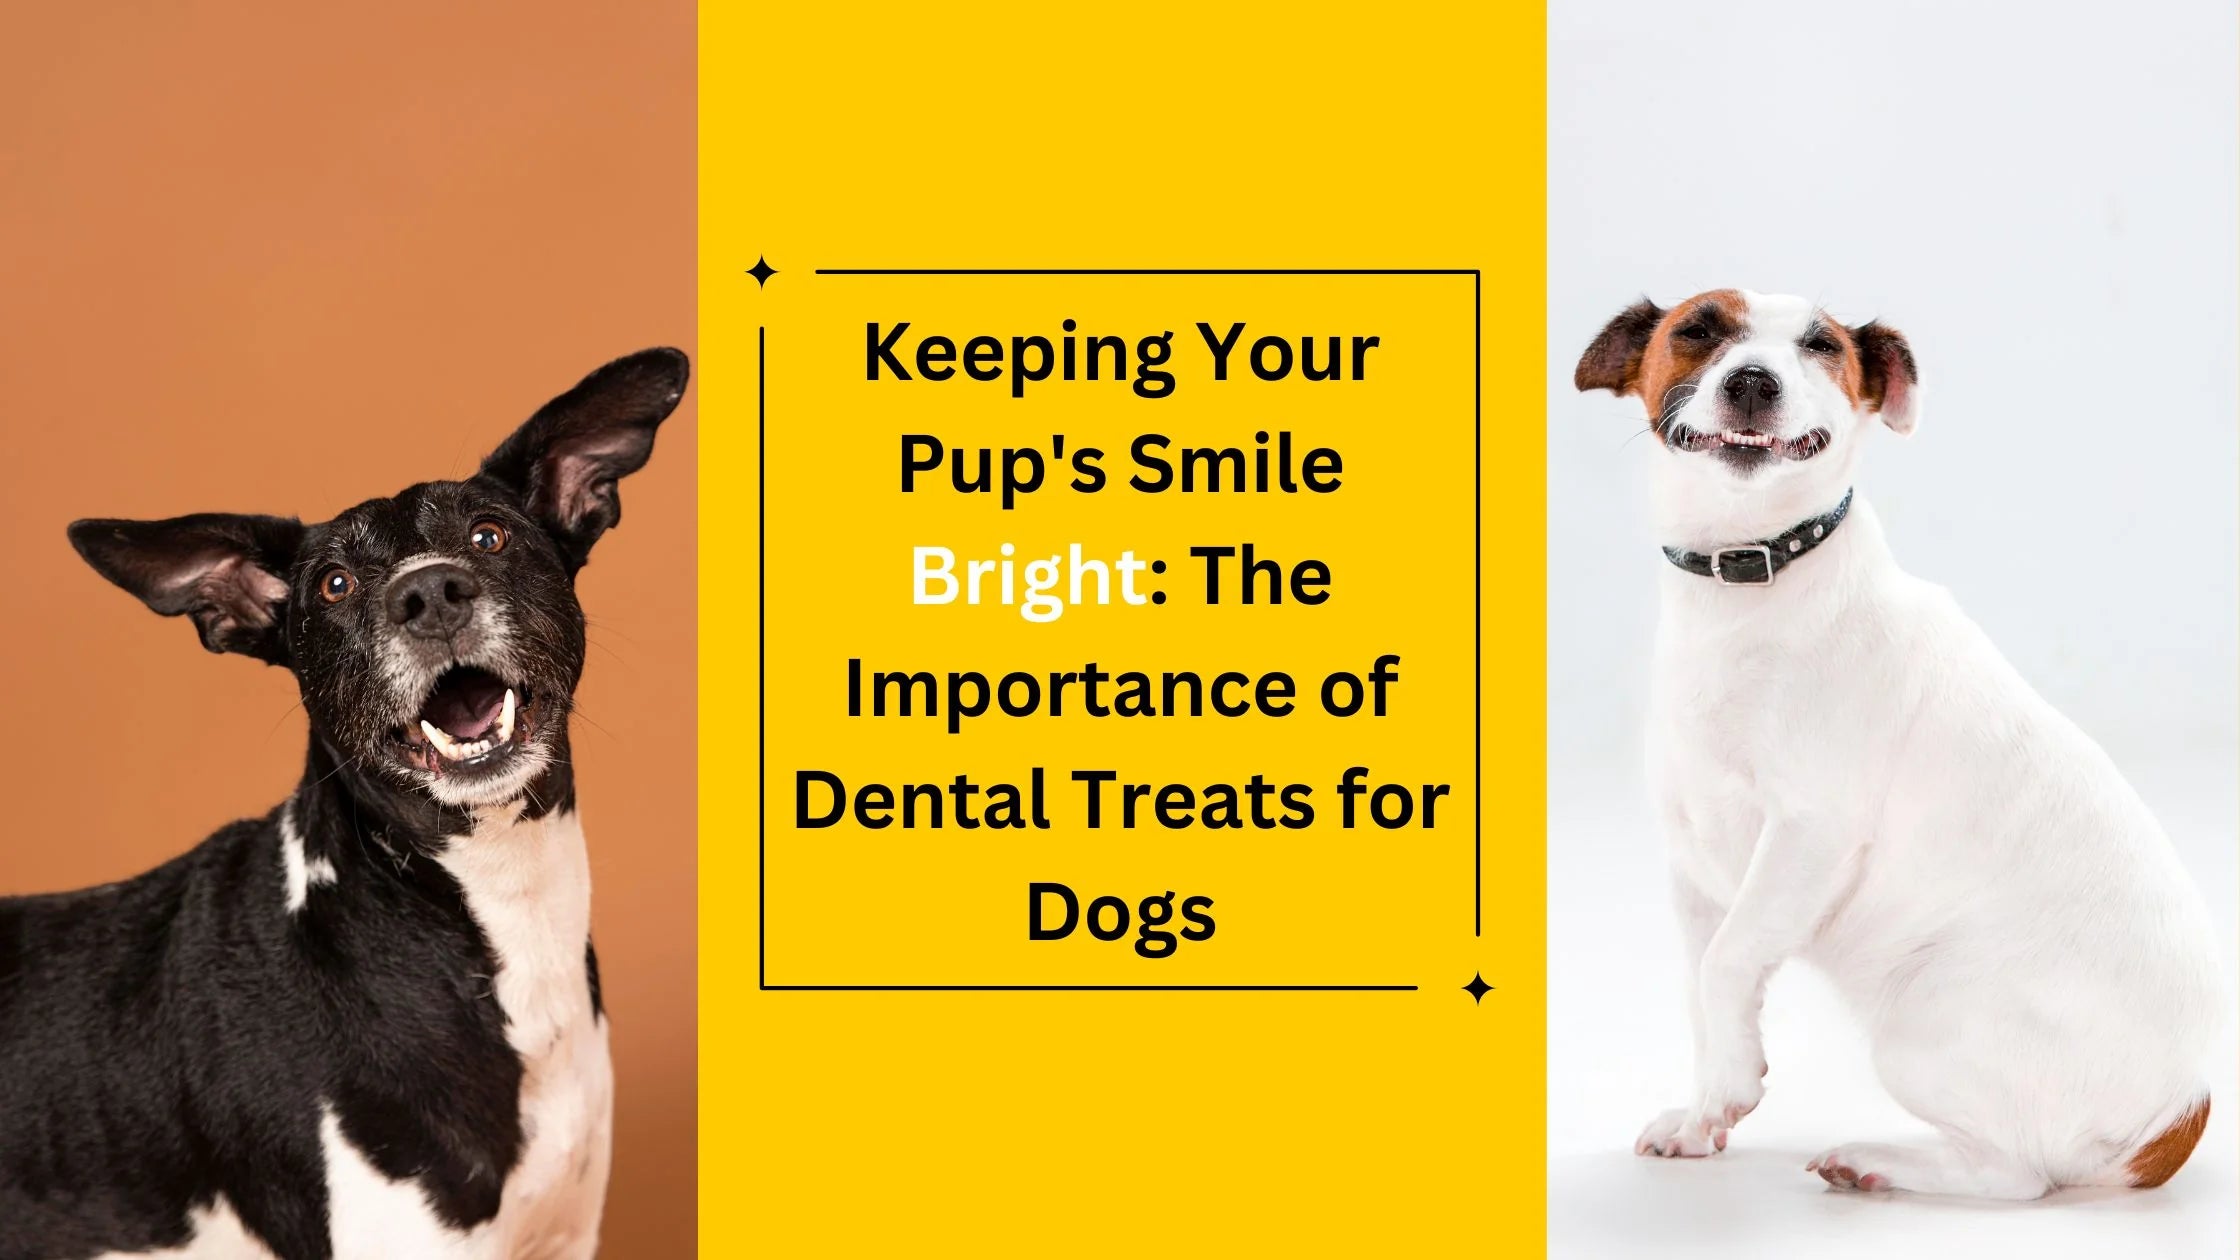 Keeping Your Pup's Smile Bright: The Importance of Dental Treats for Dogs